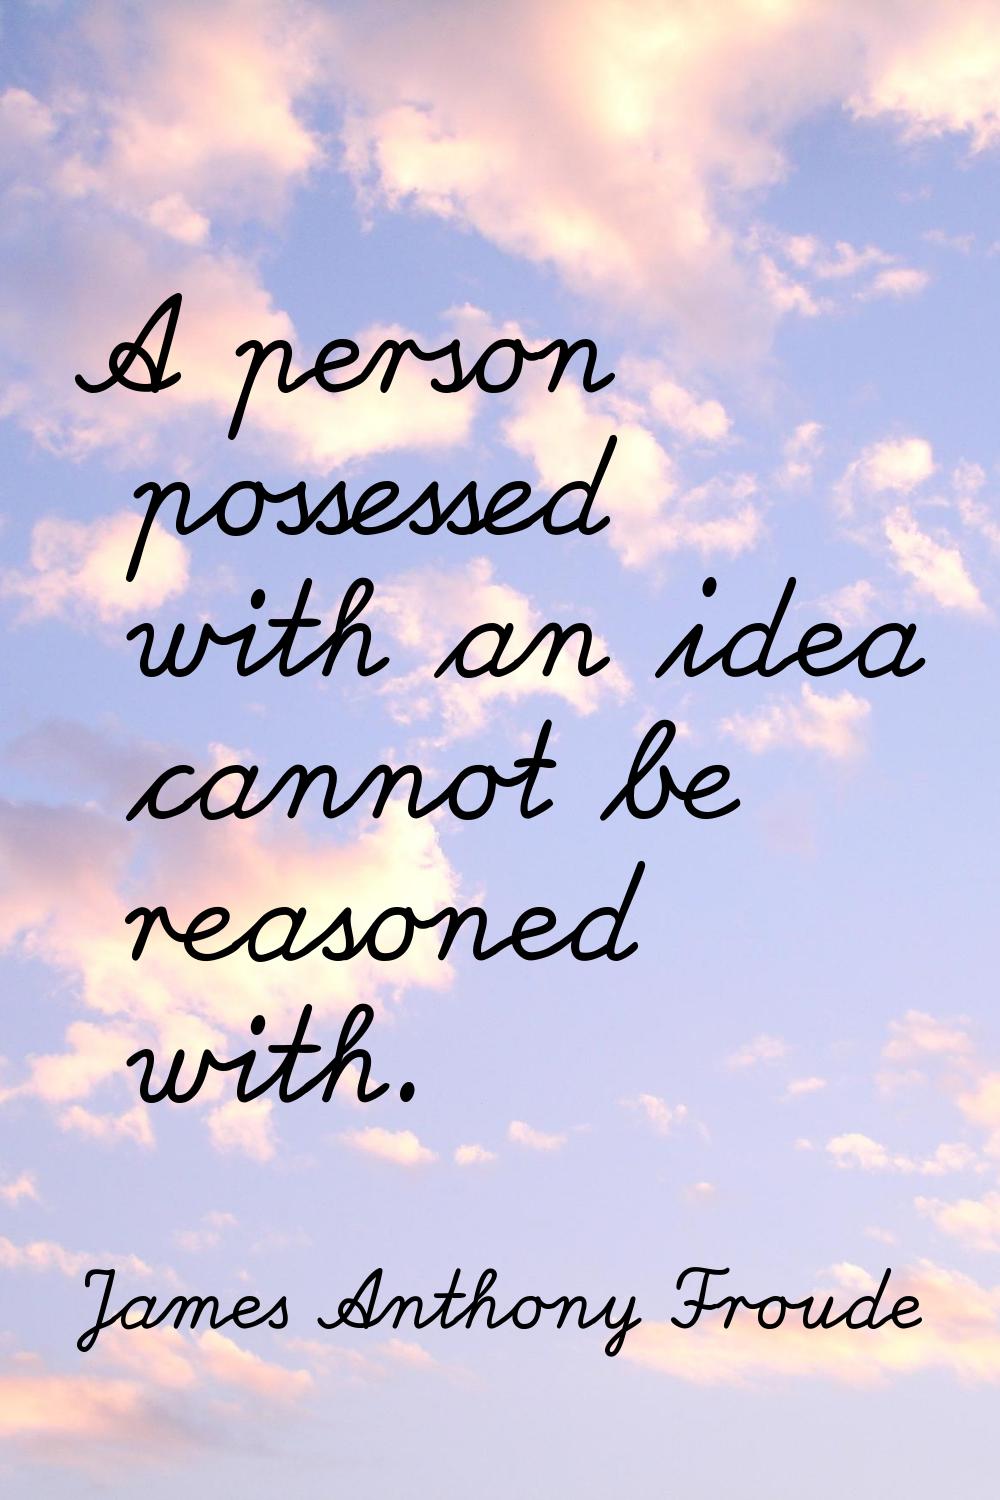 A person possessed with an idea cannot be reasoned with.